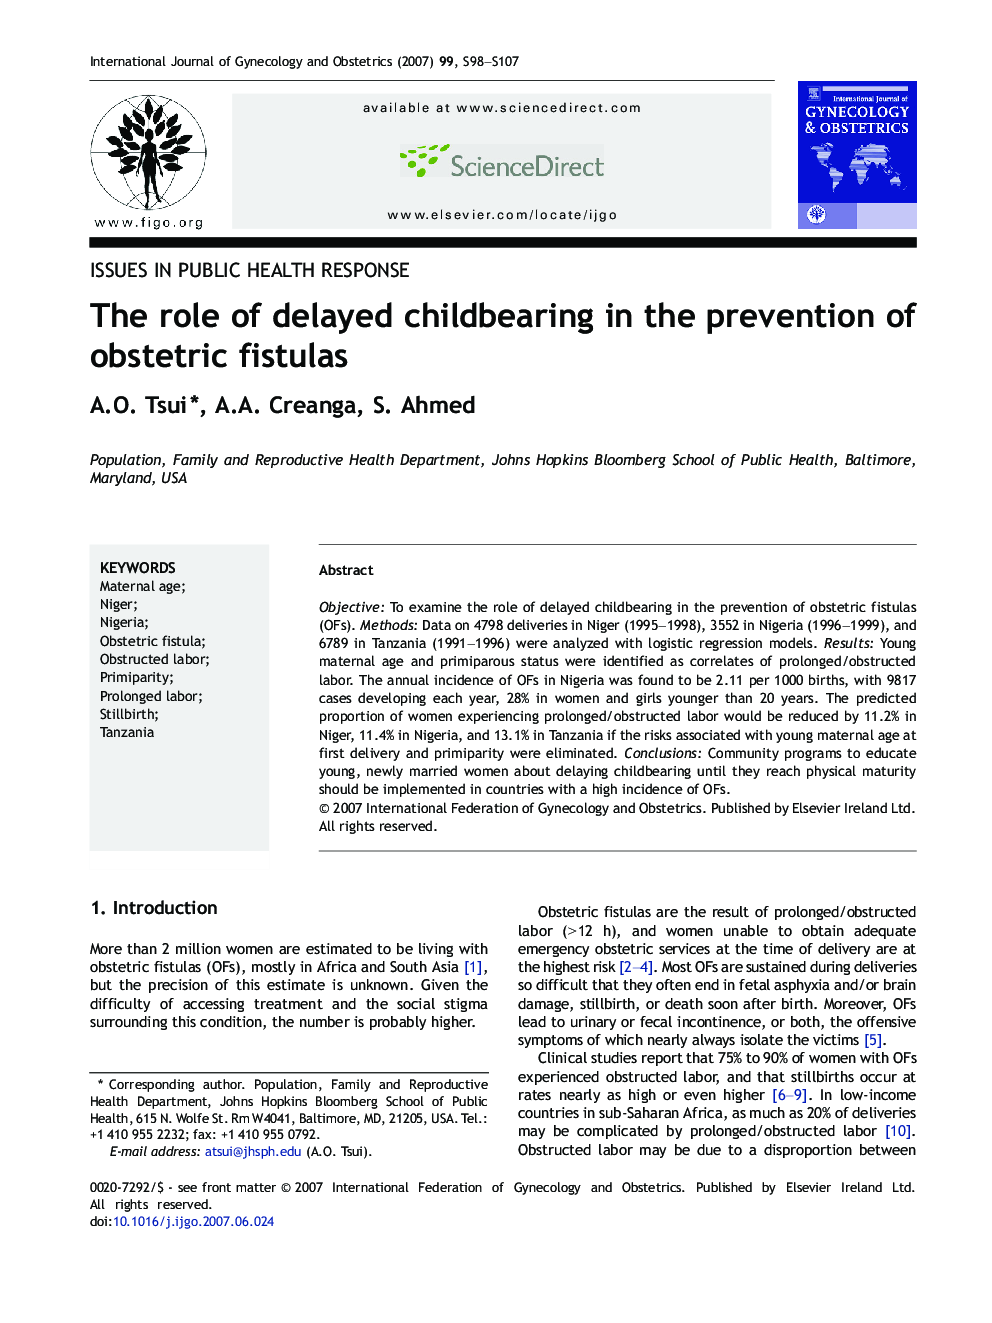 The role of delayed childbearing in the prevention of obstetric fistulas